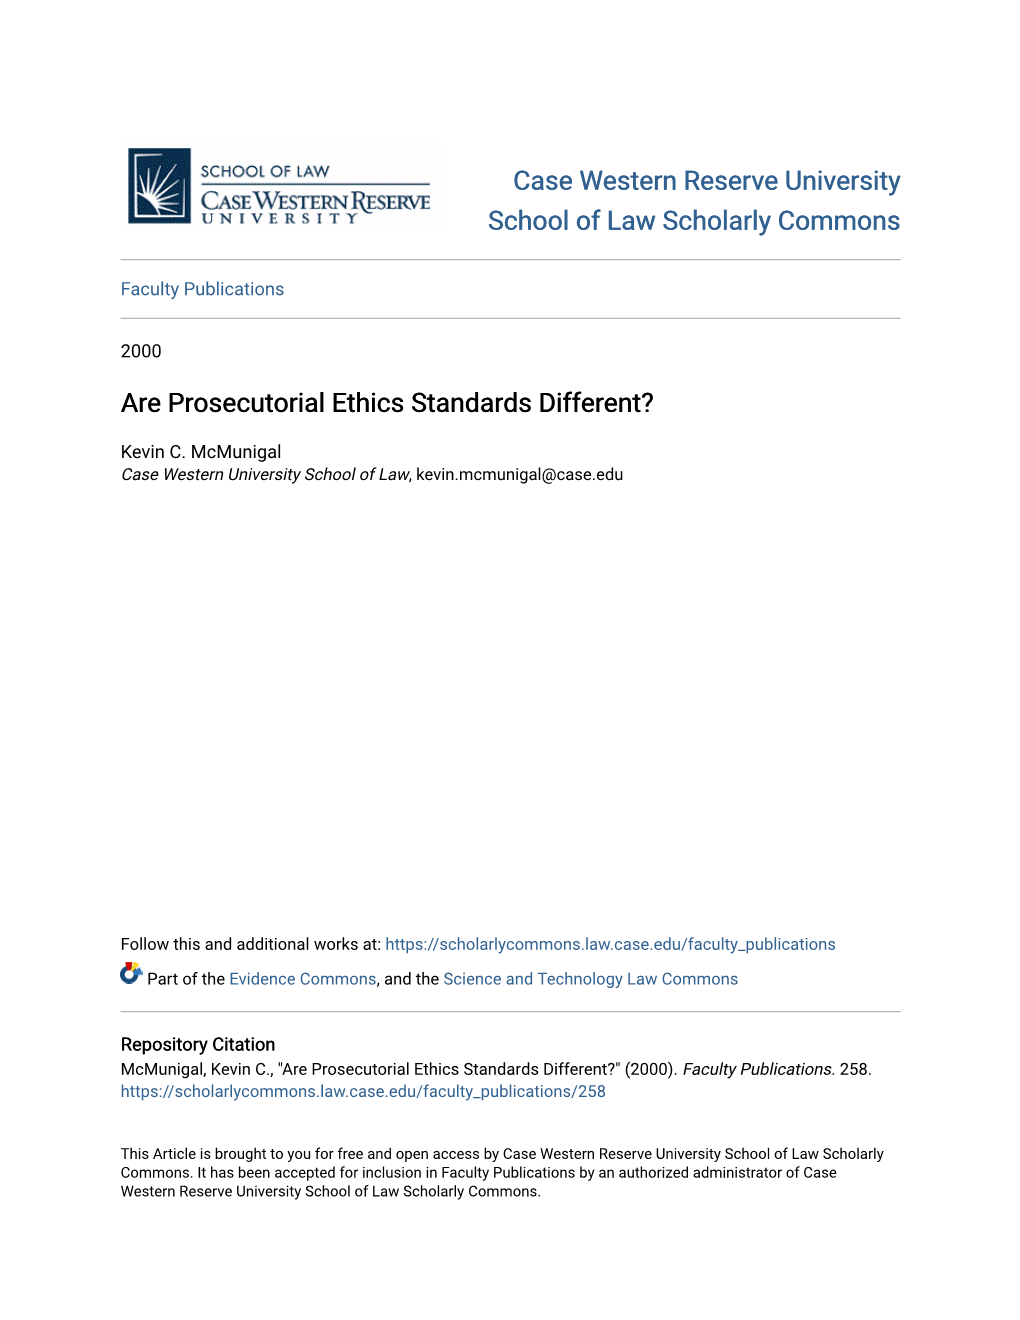 Are Prosecutorial Ethics Standards Different?